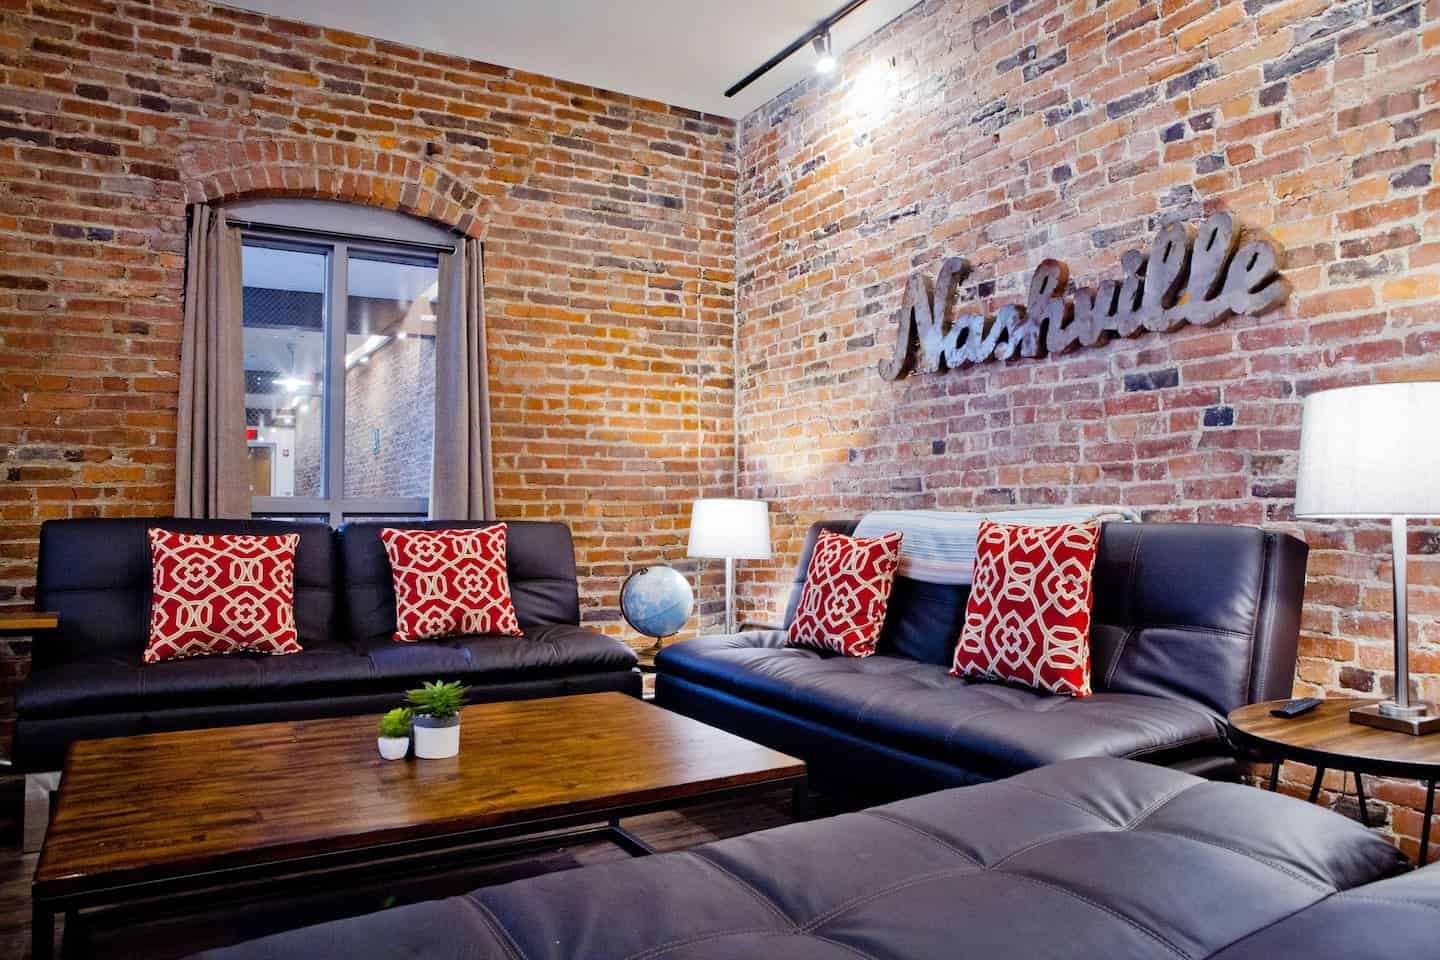 Image of Airbnb rental in Nashville, Tennessee